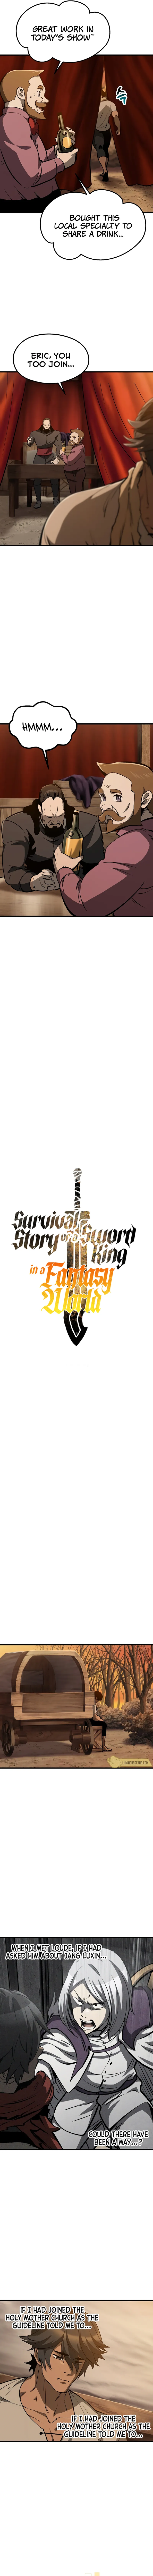 Survival Story of a Sword King in a Fantasy World chapter 190